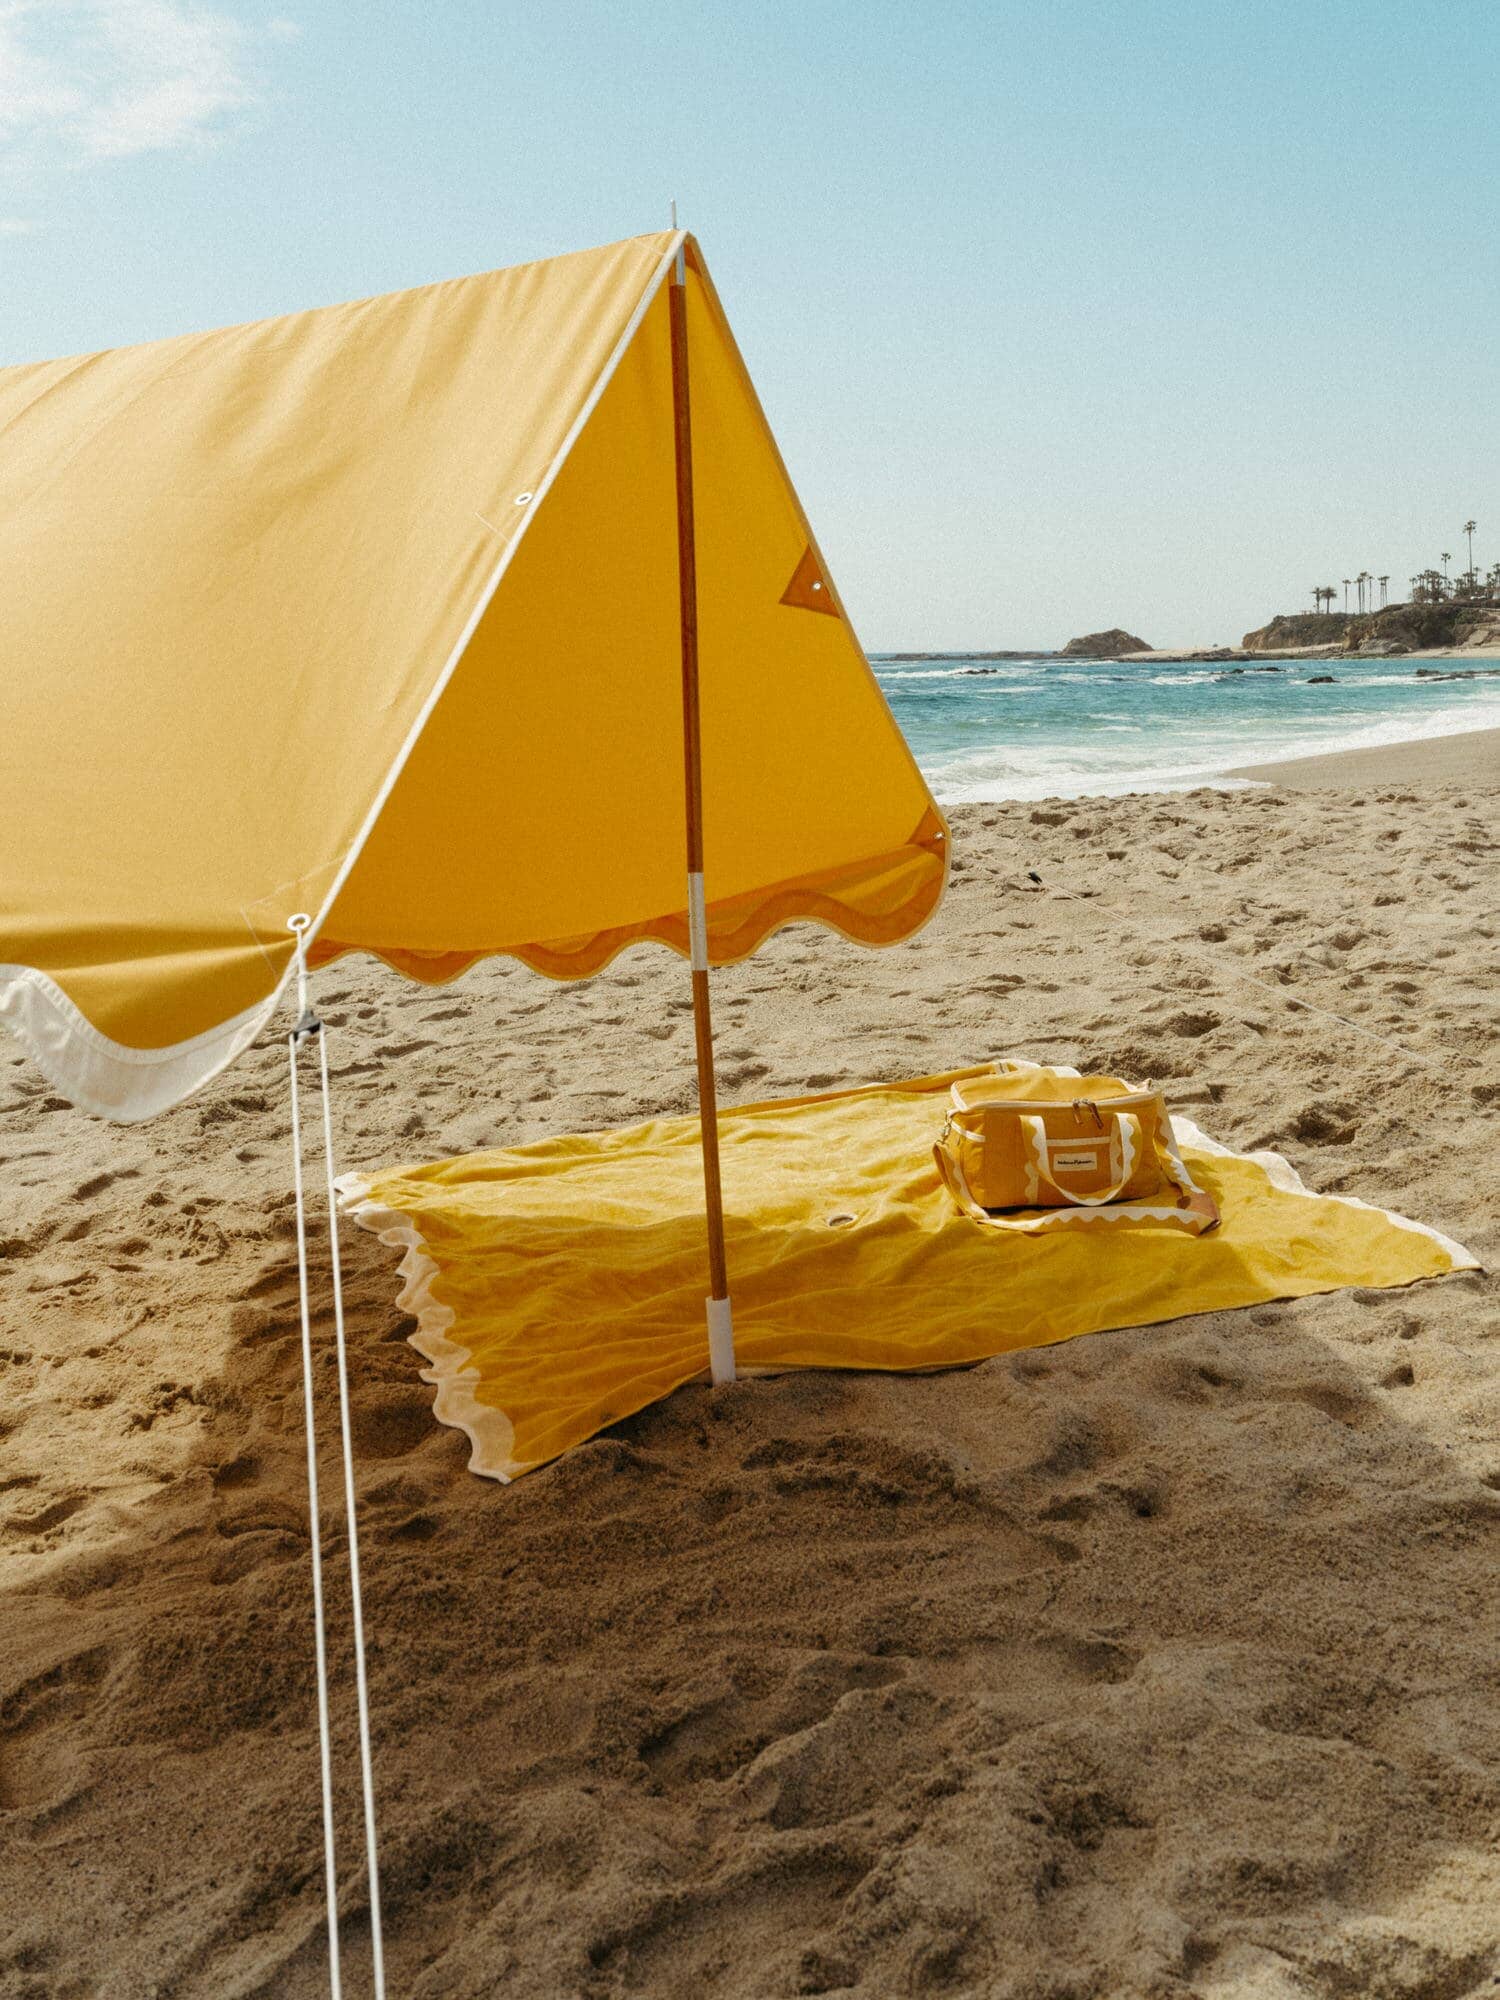 Riviera mimosa tent on the beach, with blanket & cooler